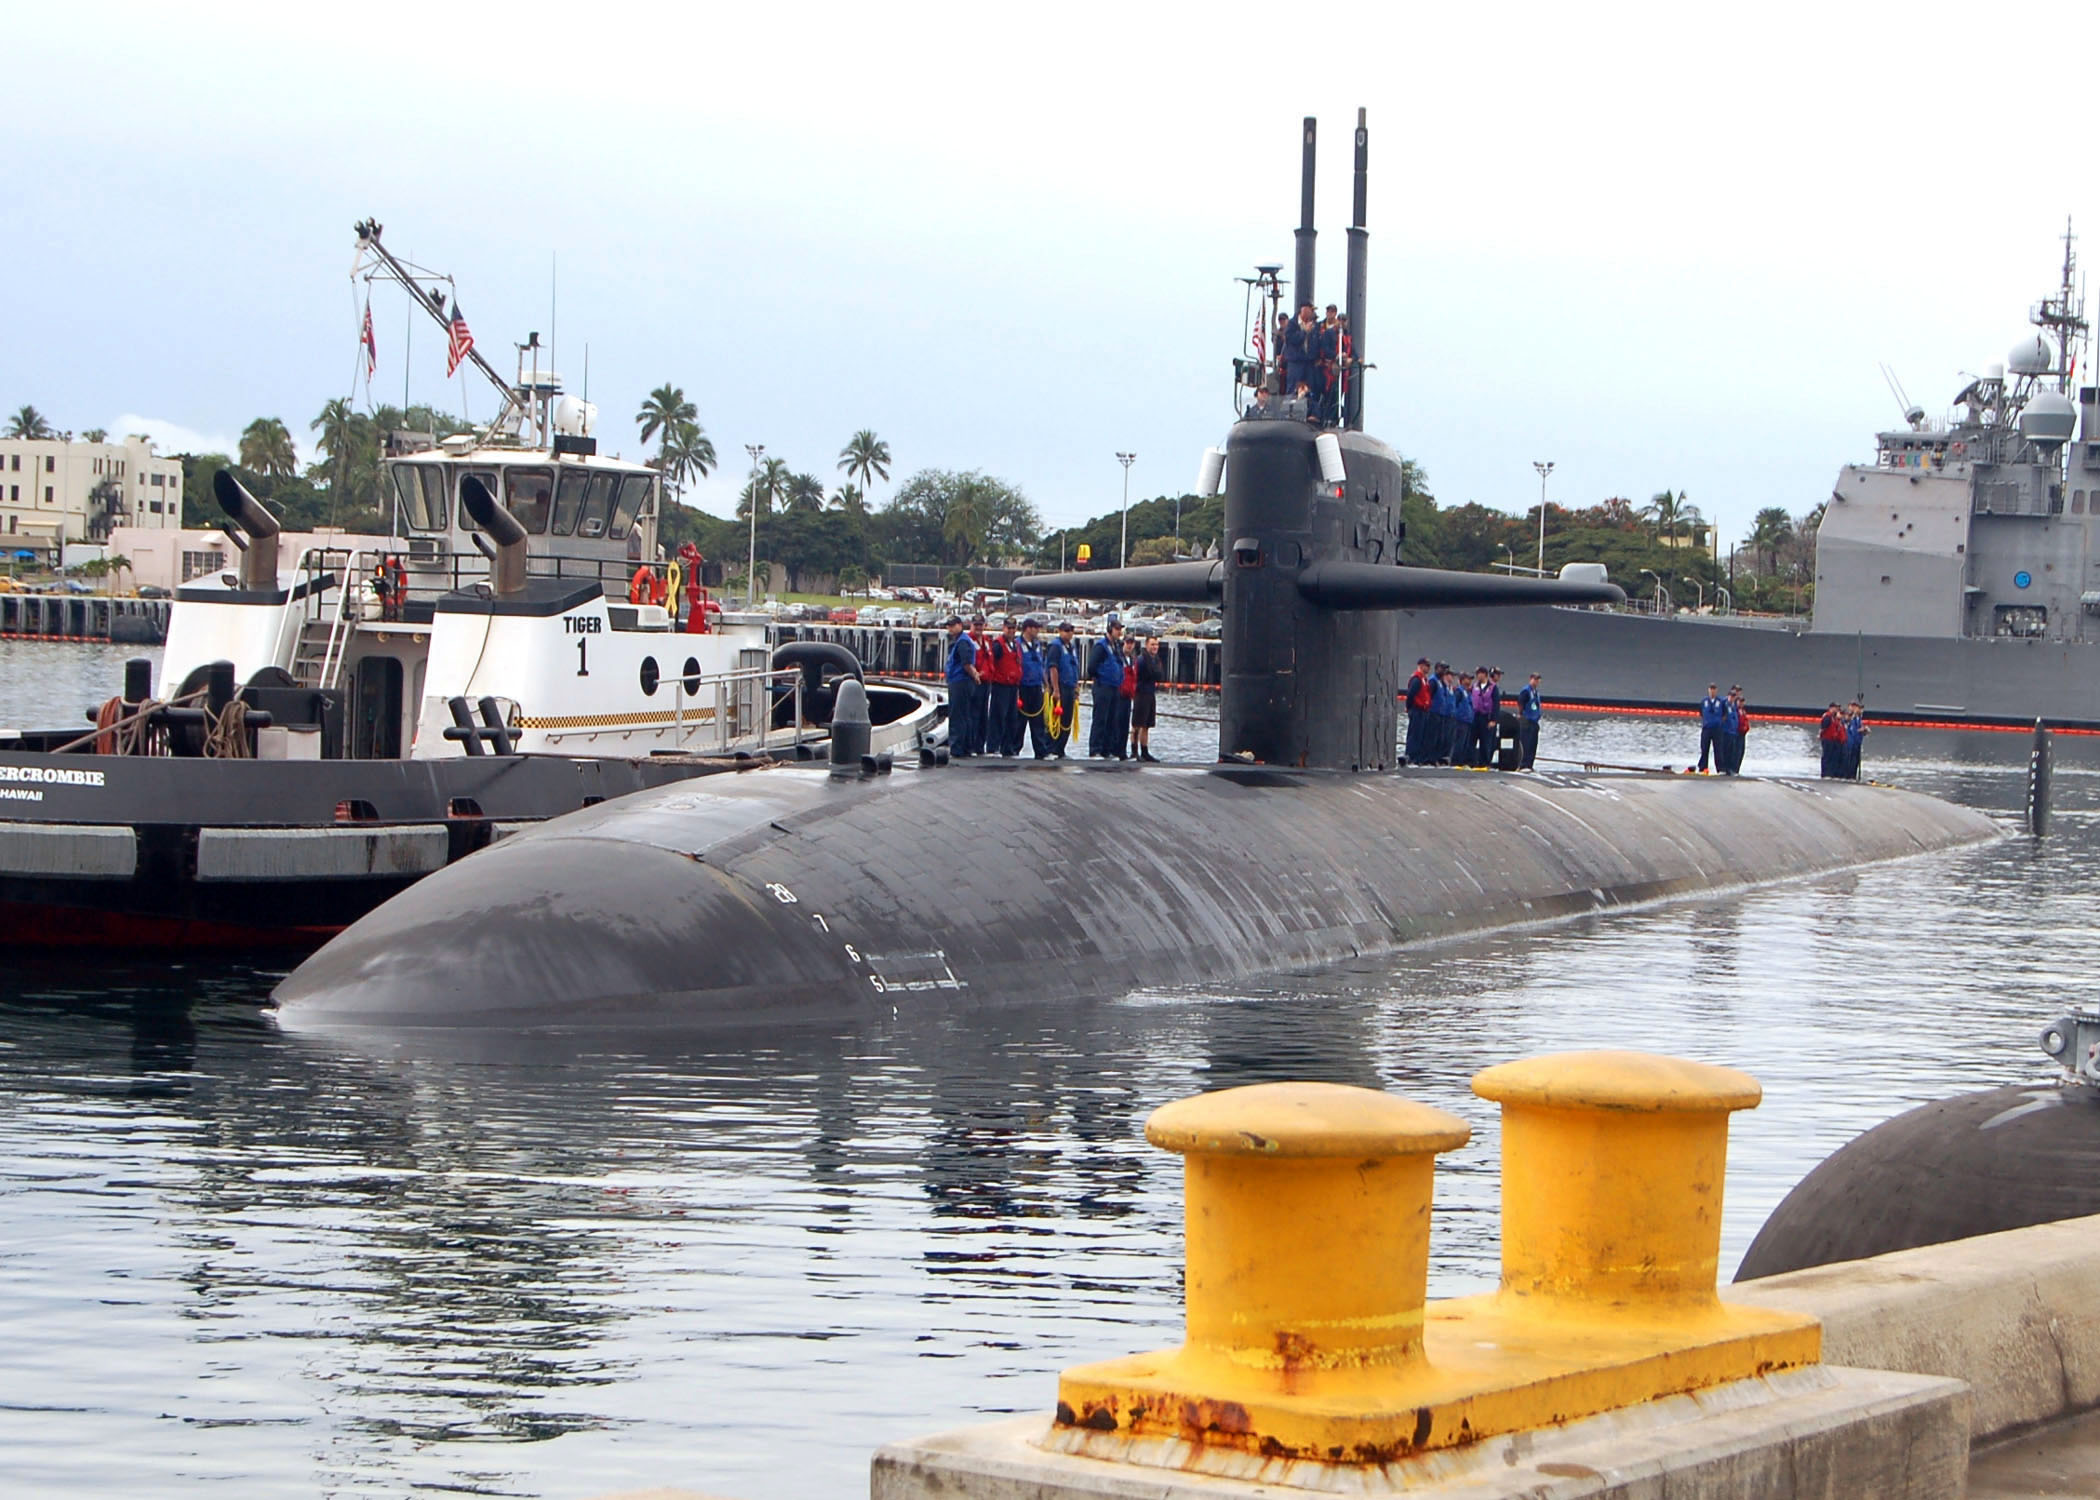 http://upload.wikimedia.org/wikipedia/commons/9/96/US_Navy_070313-N-9486C-001_Fast_attack_submarine_USS_Bremerton_(SSN_698)_returns_to_the_operational_side_of_the_Pacific_Submarine_Force_as_she_returns_to_Pearl_Harbor_Naval_Station.jpg